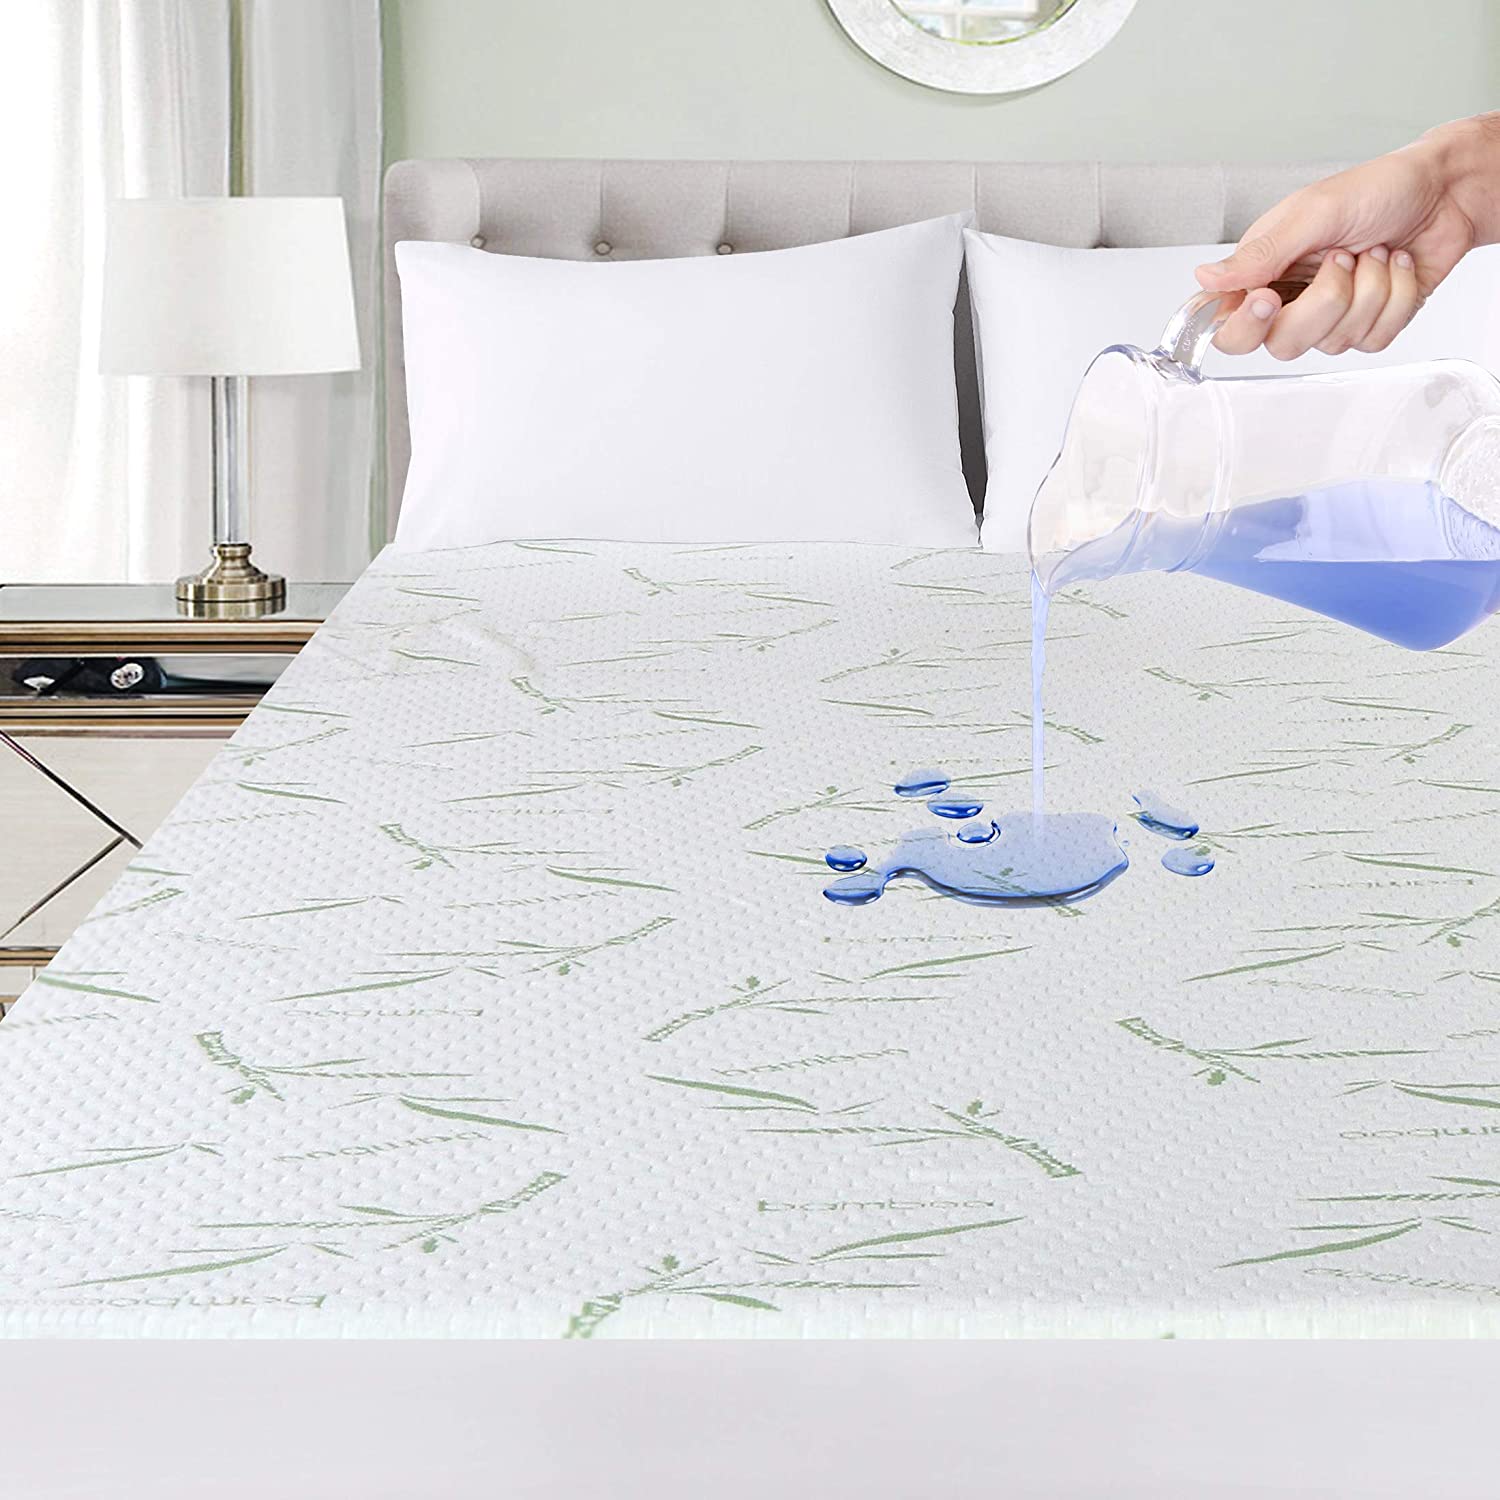 Details about   Bamboo Mattress Pad Protector Fitted Breathable Waterproof Deep Cover Polyester 